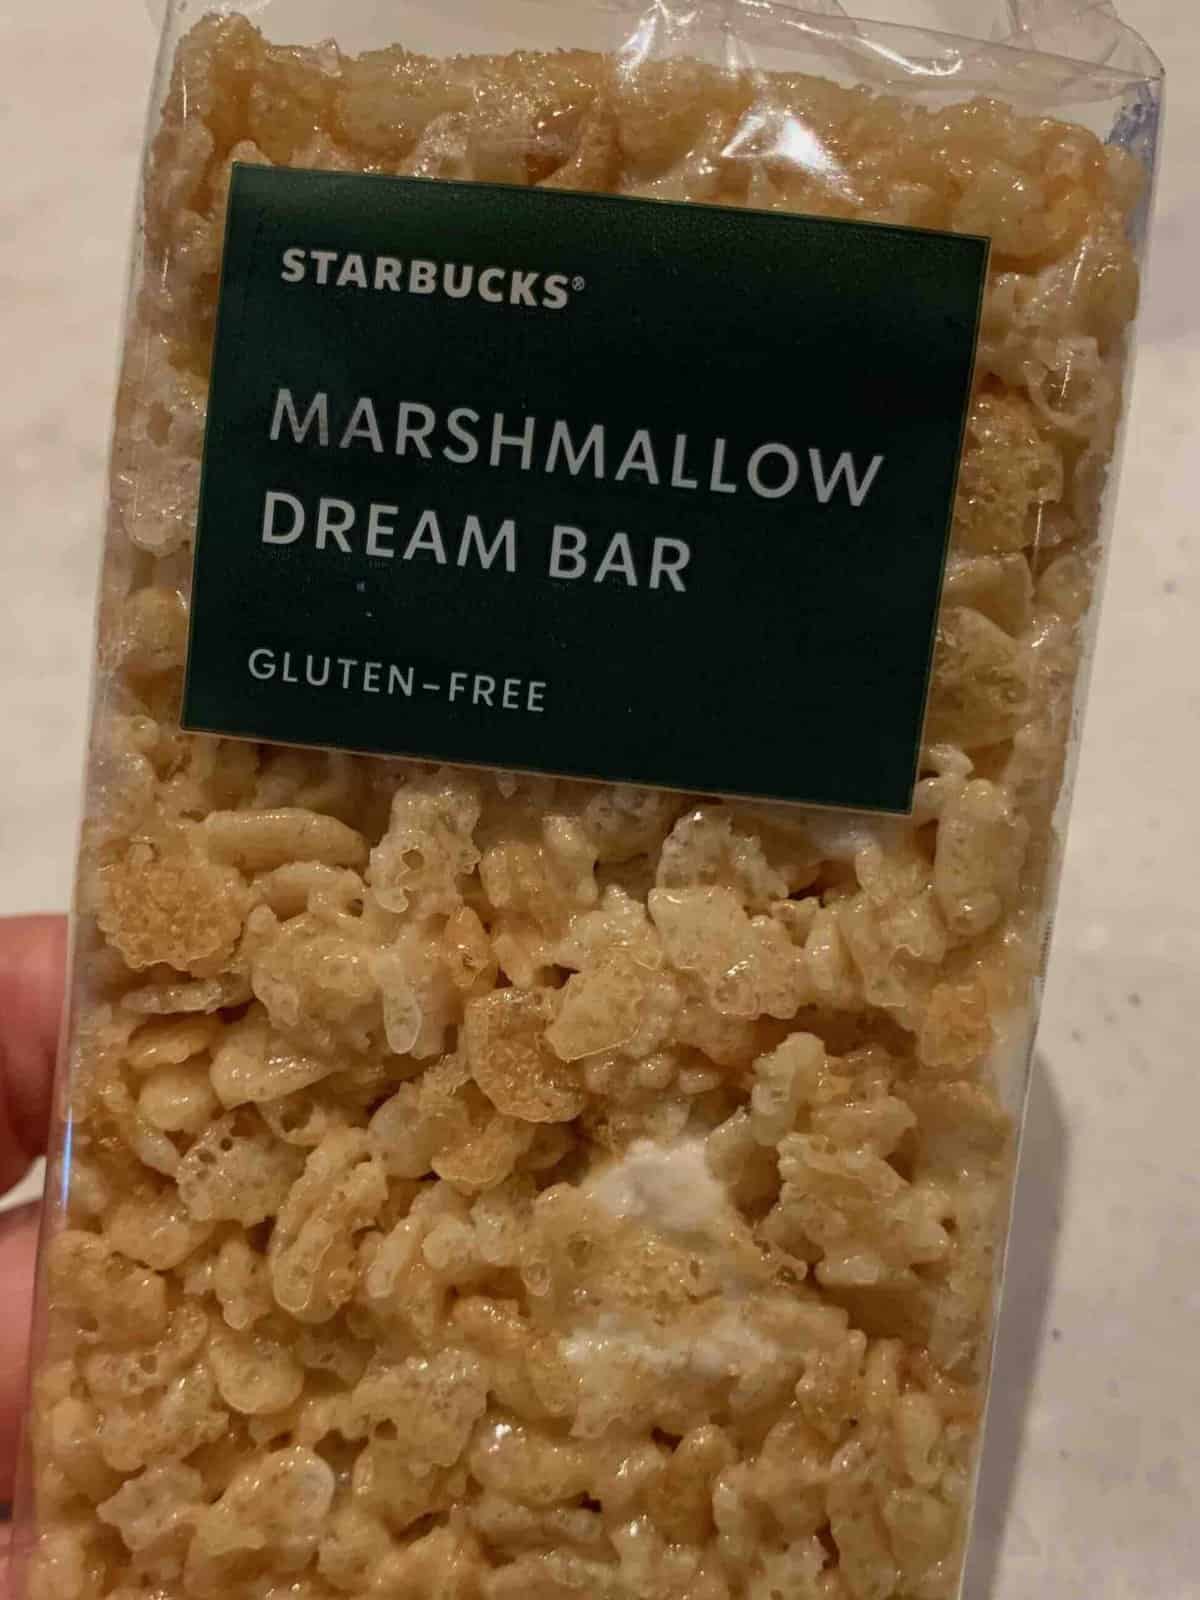 hand holding marshmallow dream bar with green label and white text: "Starbucks Marshmallow Dream Bar, Gluten Free"